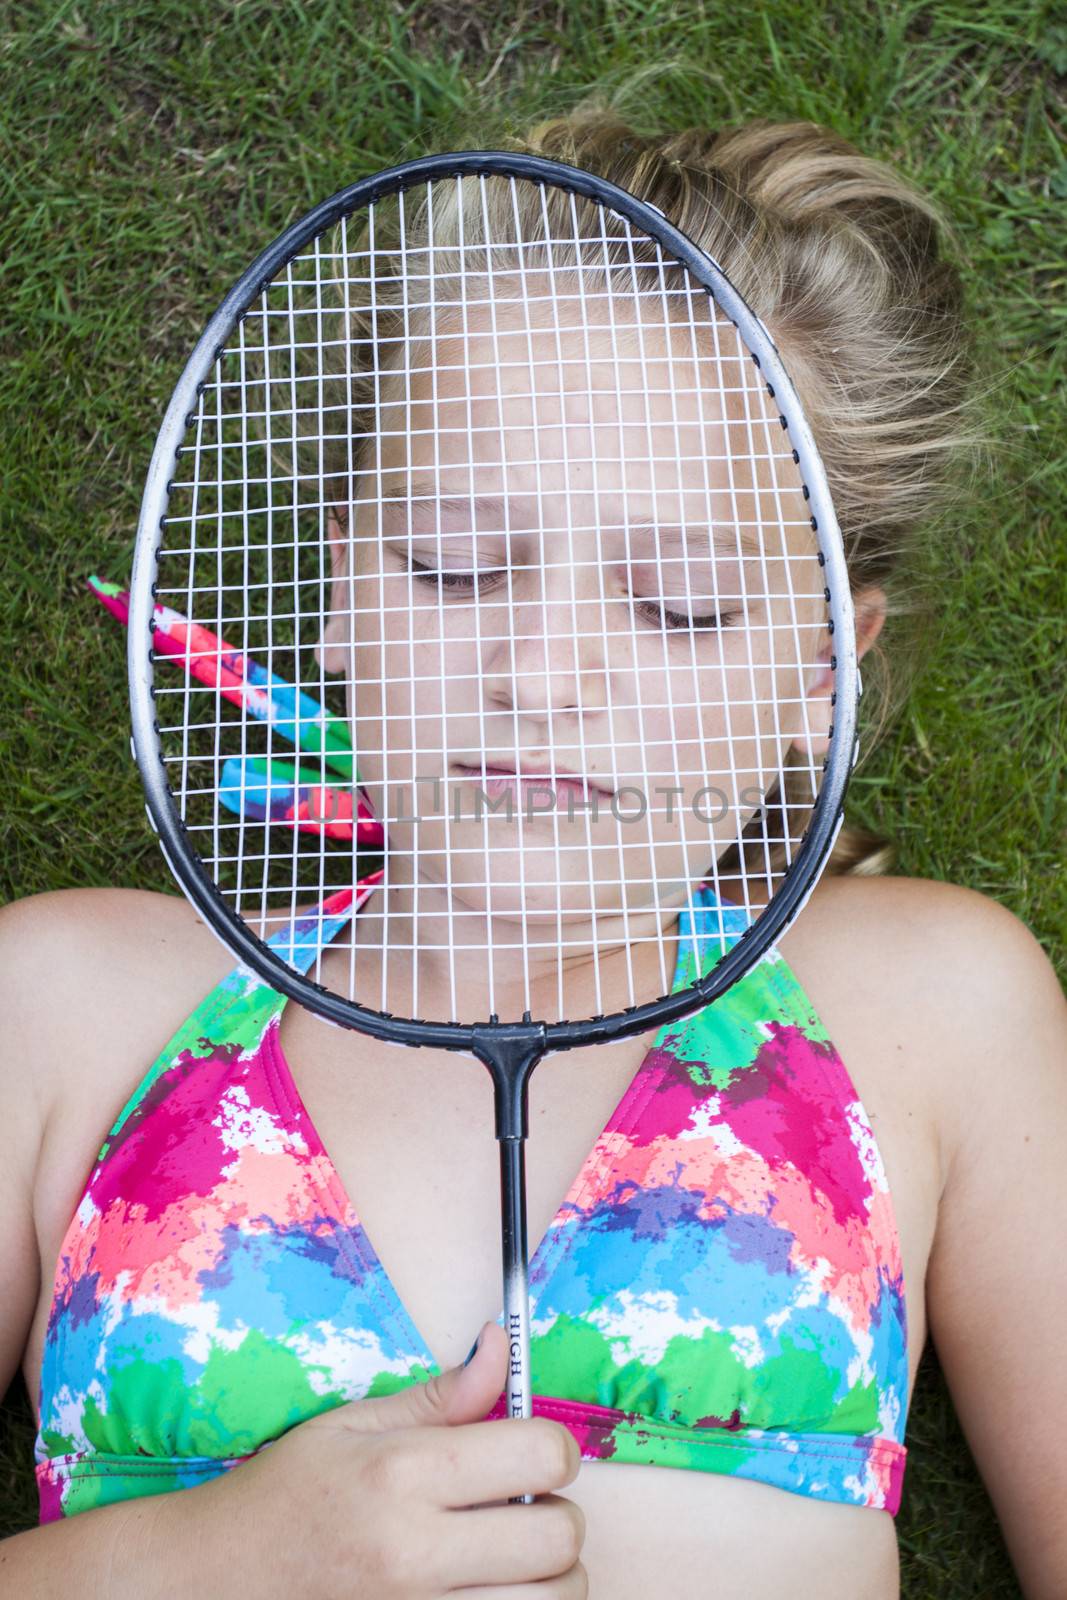 A teenage girl lying on the lawn outside with eyes closed, holding a badminton racket in front of her face